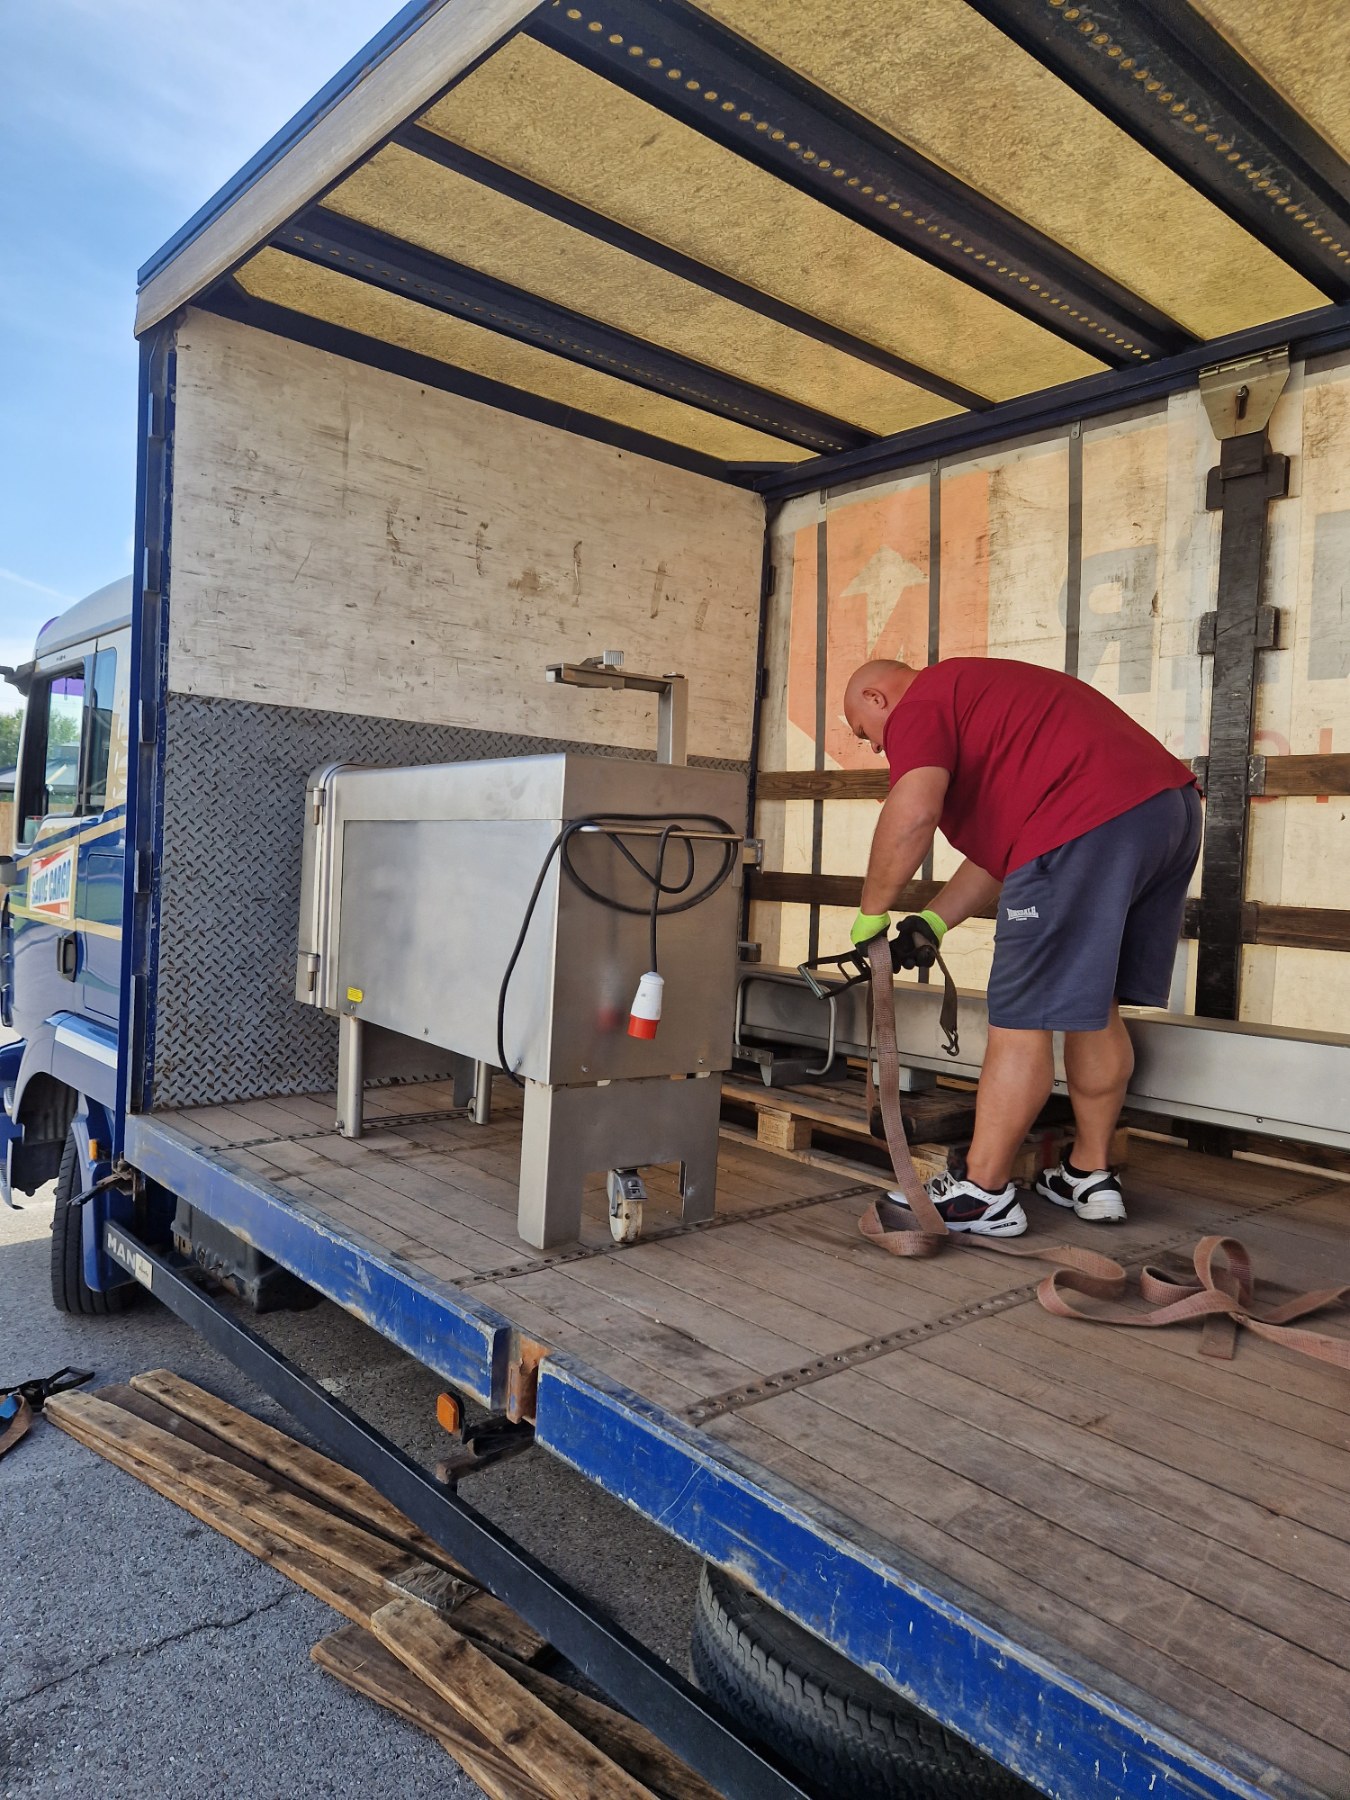 Delivery of meat machines for a customer from the Republic of Srpska